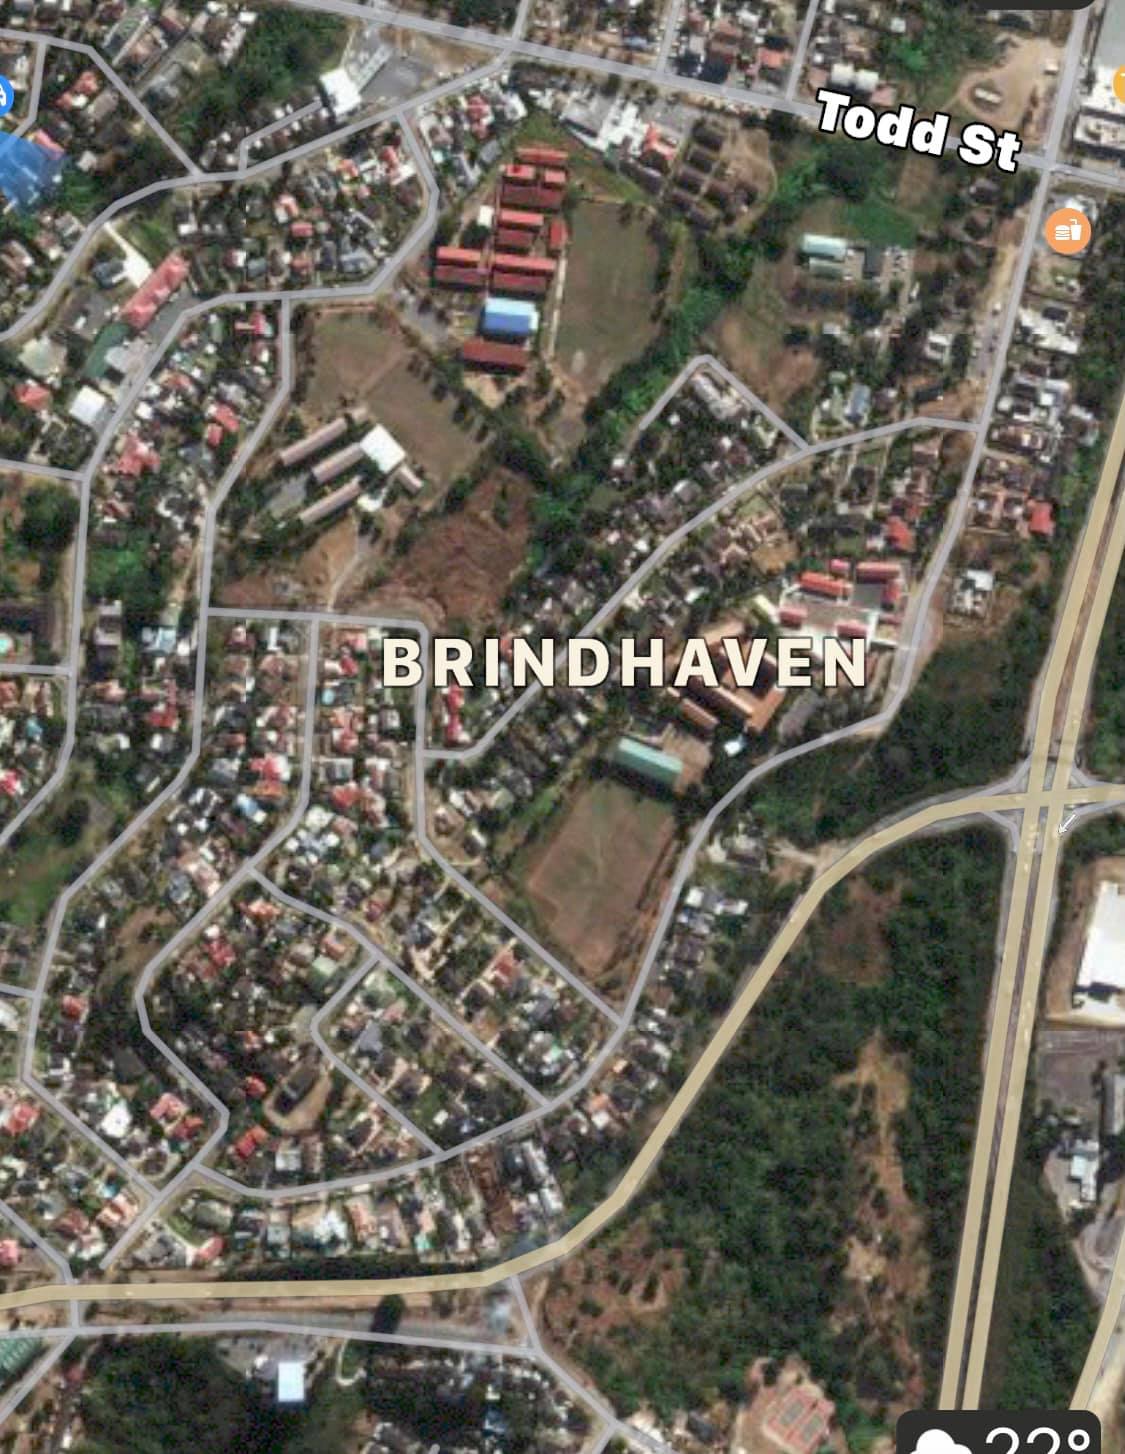 Three (3) Armed Robbers are targeting joggers in the Brindhaven, Verulam